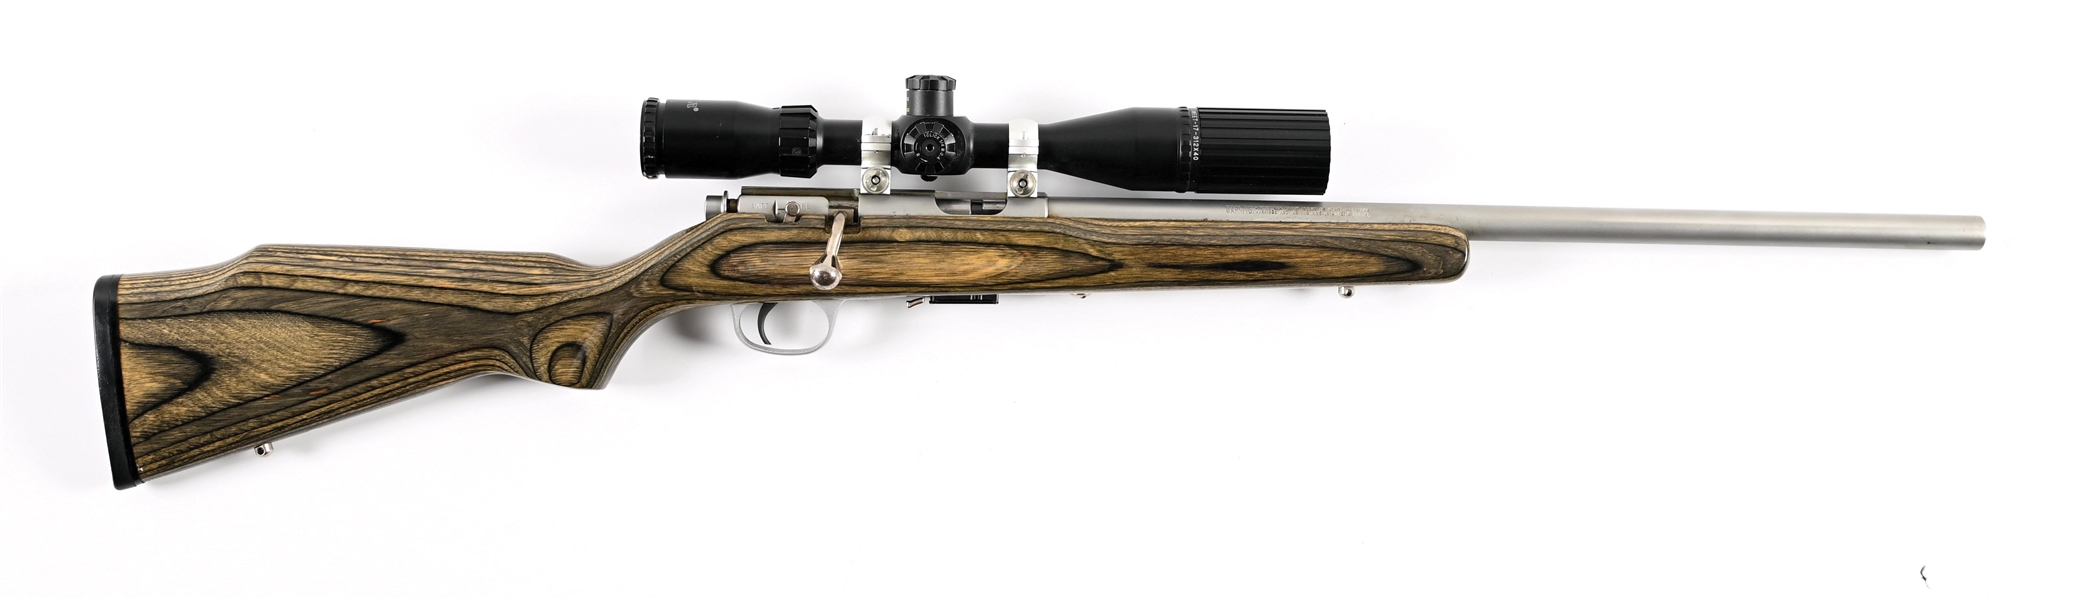 (M) MARLIN MODEL 17VS BOLT ACTION RIFLE WITH SCOPE.